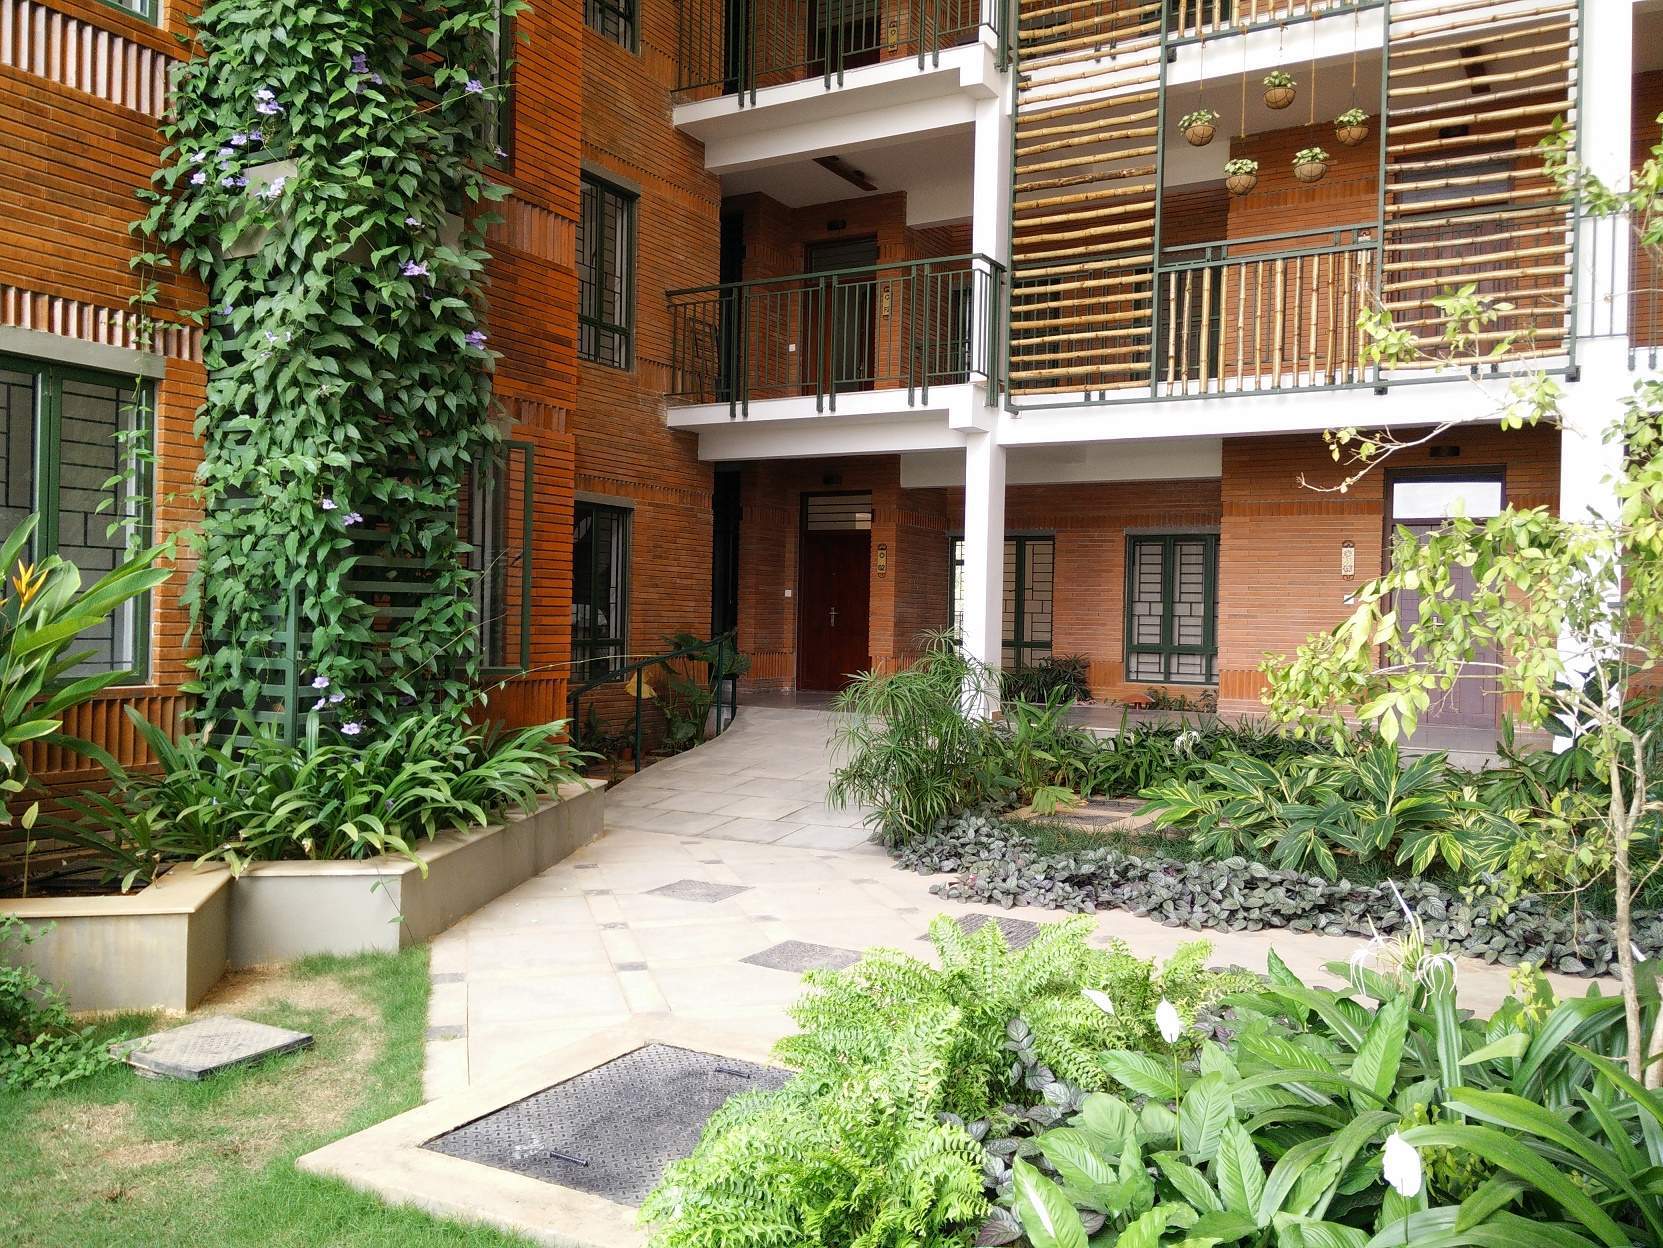 Flat/Apartment Good Earth Thondayad, Thondayad, Calicut, Kerala Property located in a beautifully landscaped building. 